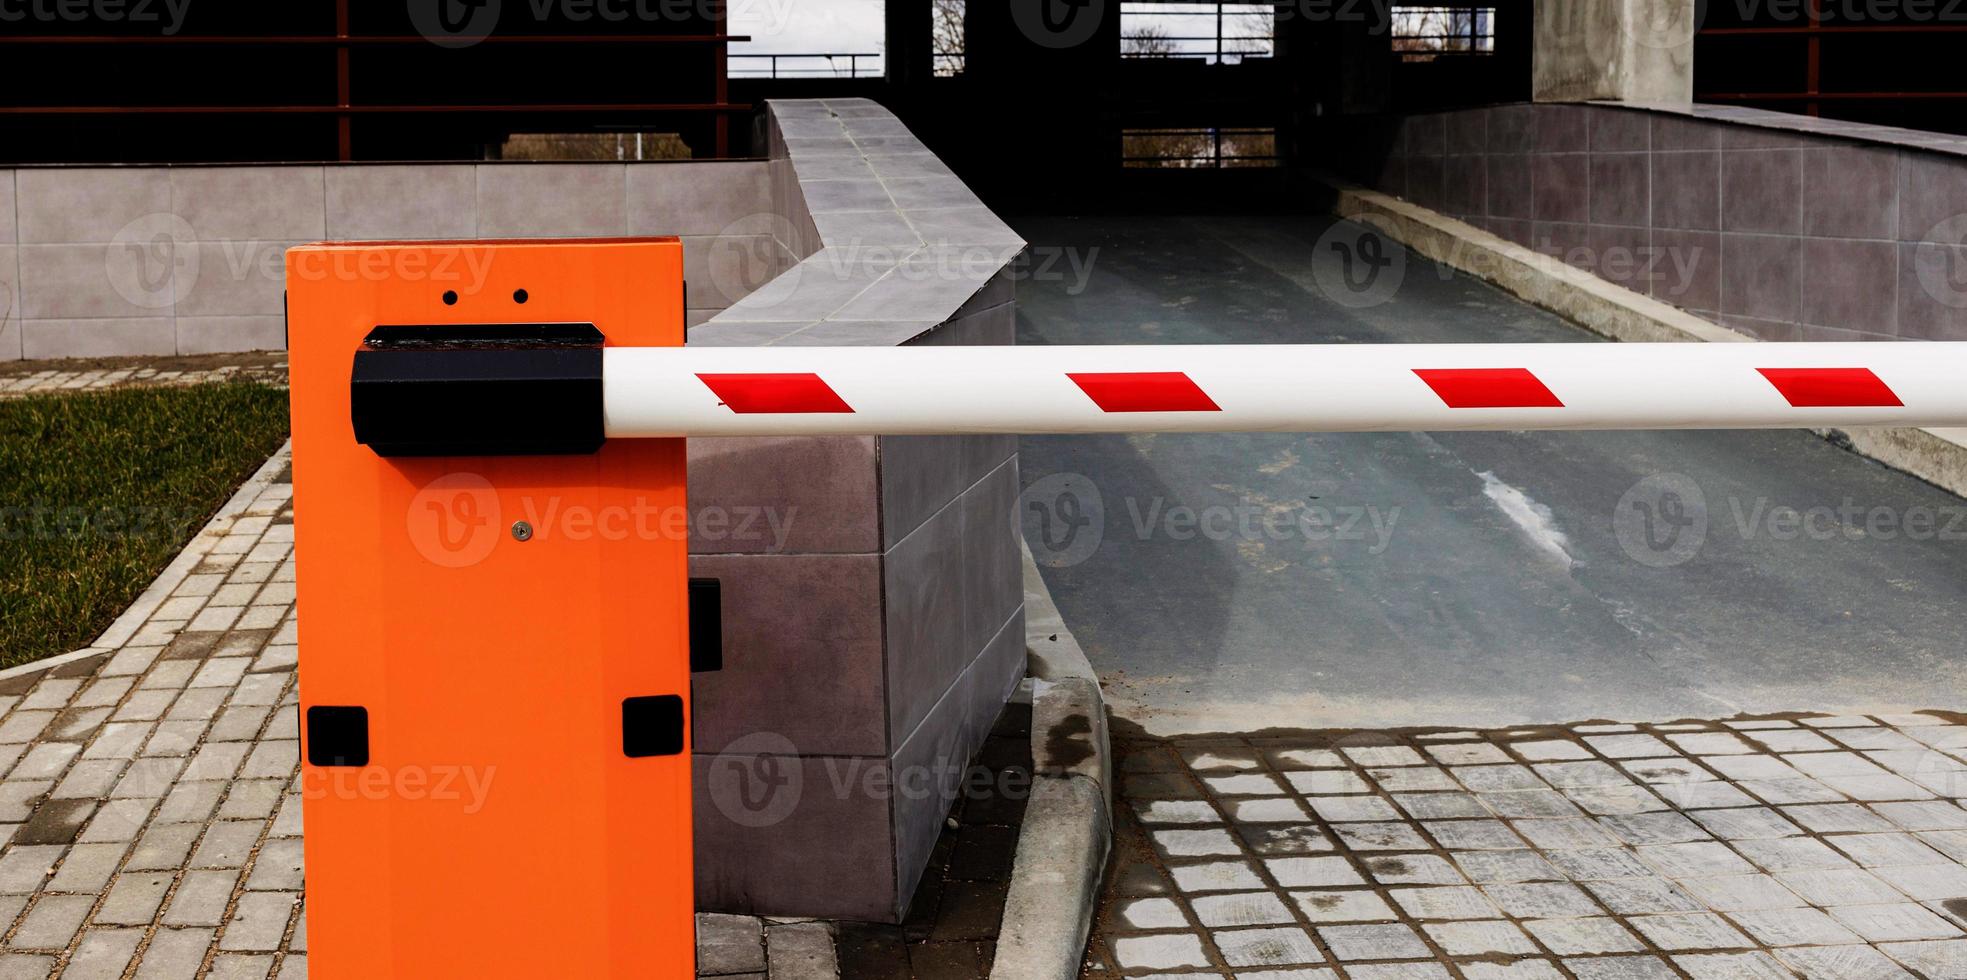 Barrier Gate Automatic system photo